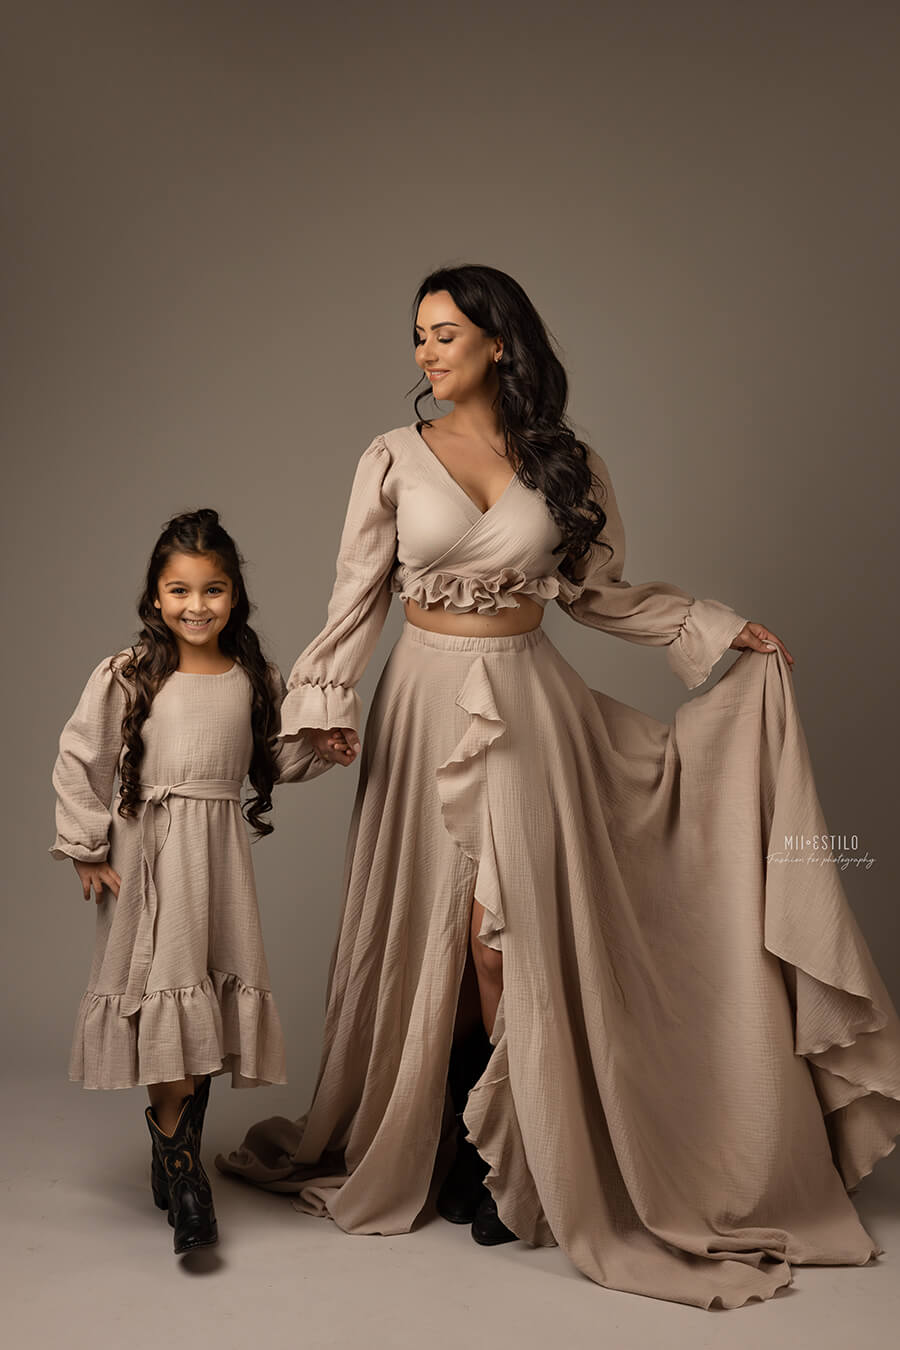 mom and daughter both with dark hair pose holding hands in a studio during a boho photoshoot. they are both wearing a sand outfit made of linen. both dresses have several ruffle details. the mom wears a long skirt and a top with long sleeves and an adjustable sweetheart top. 